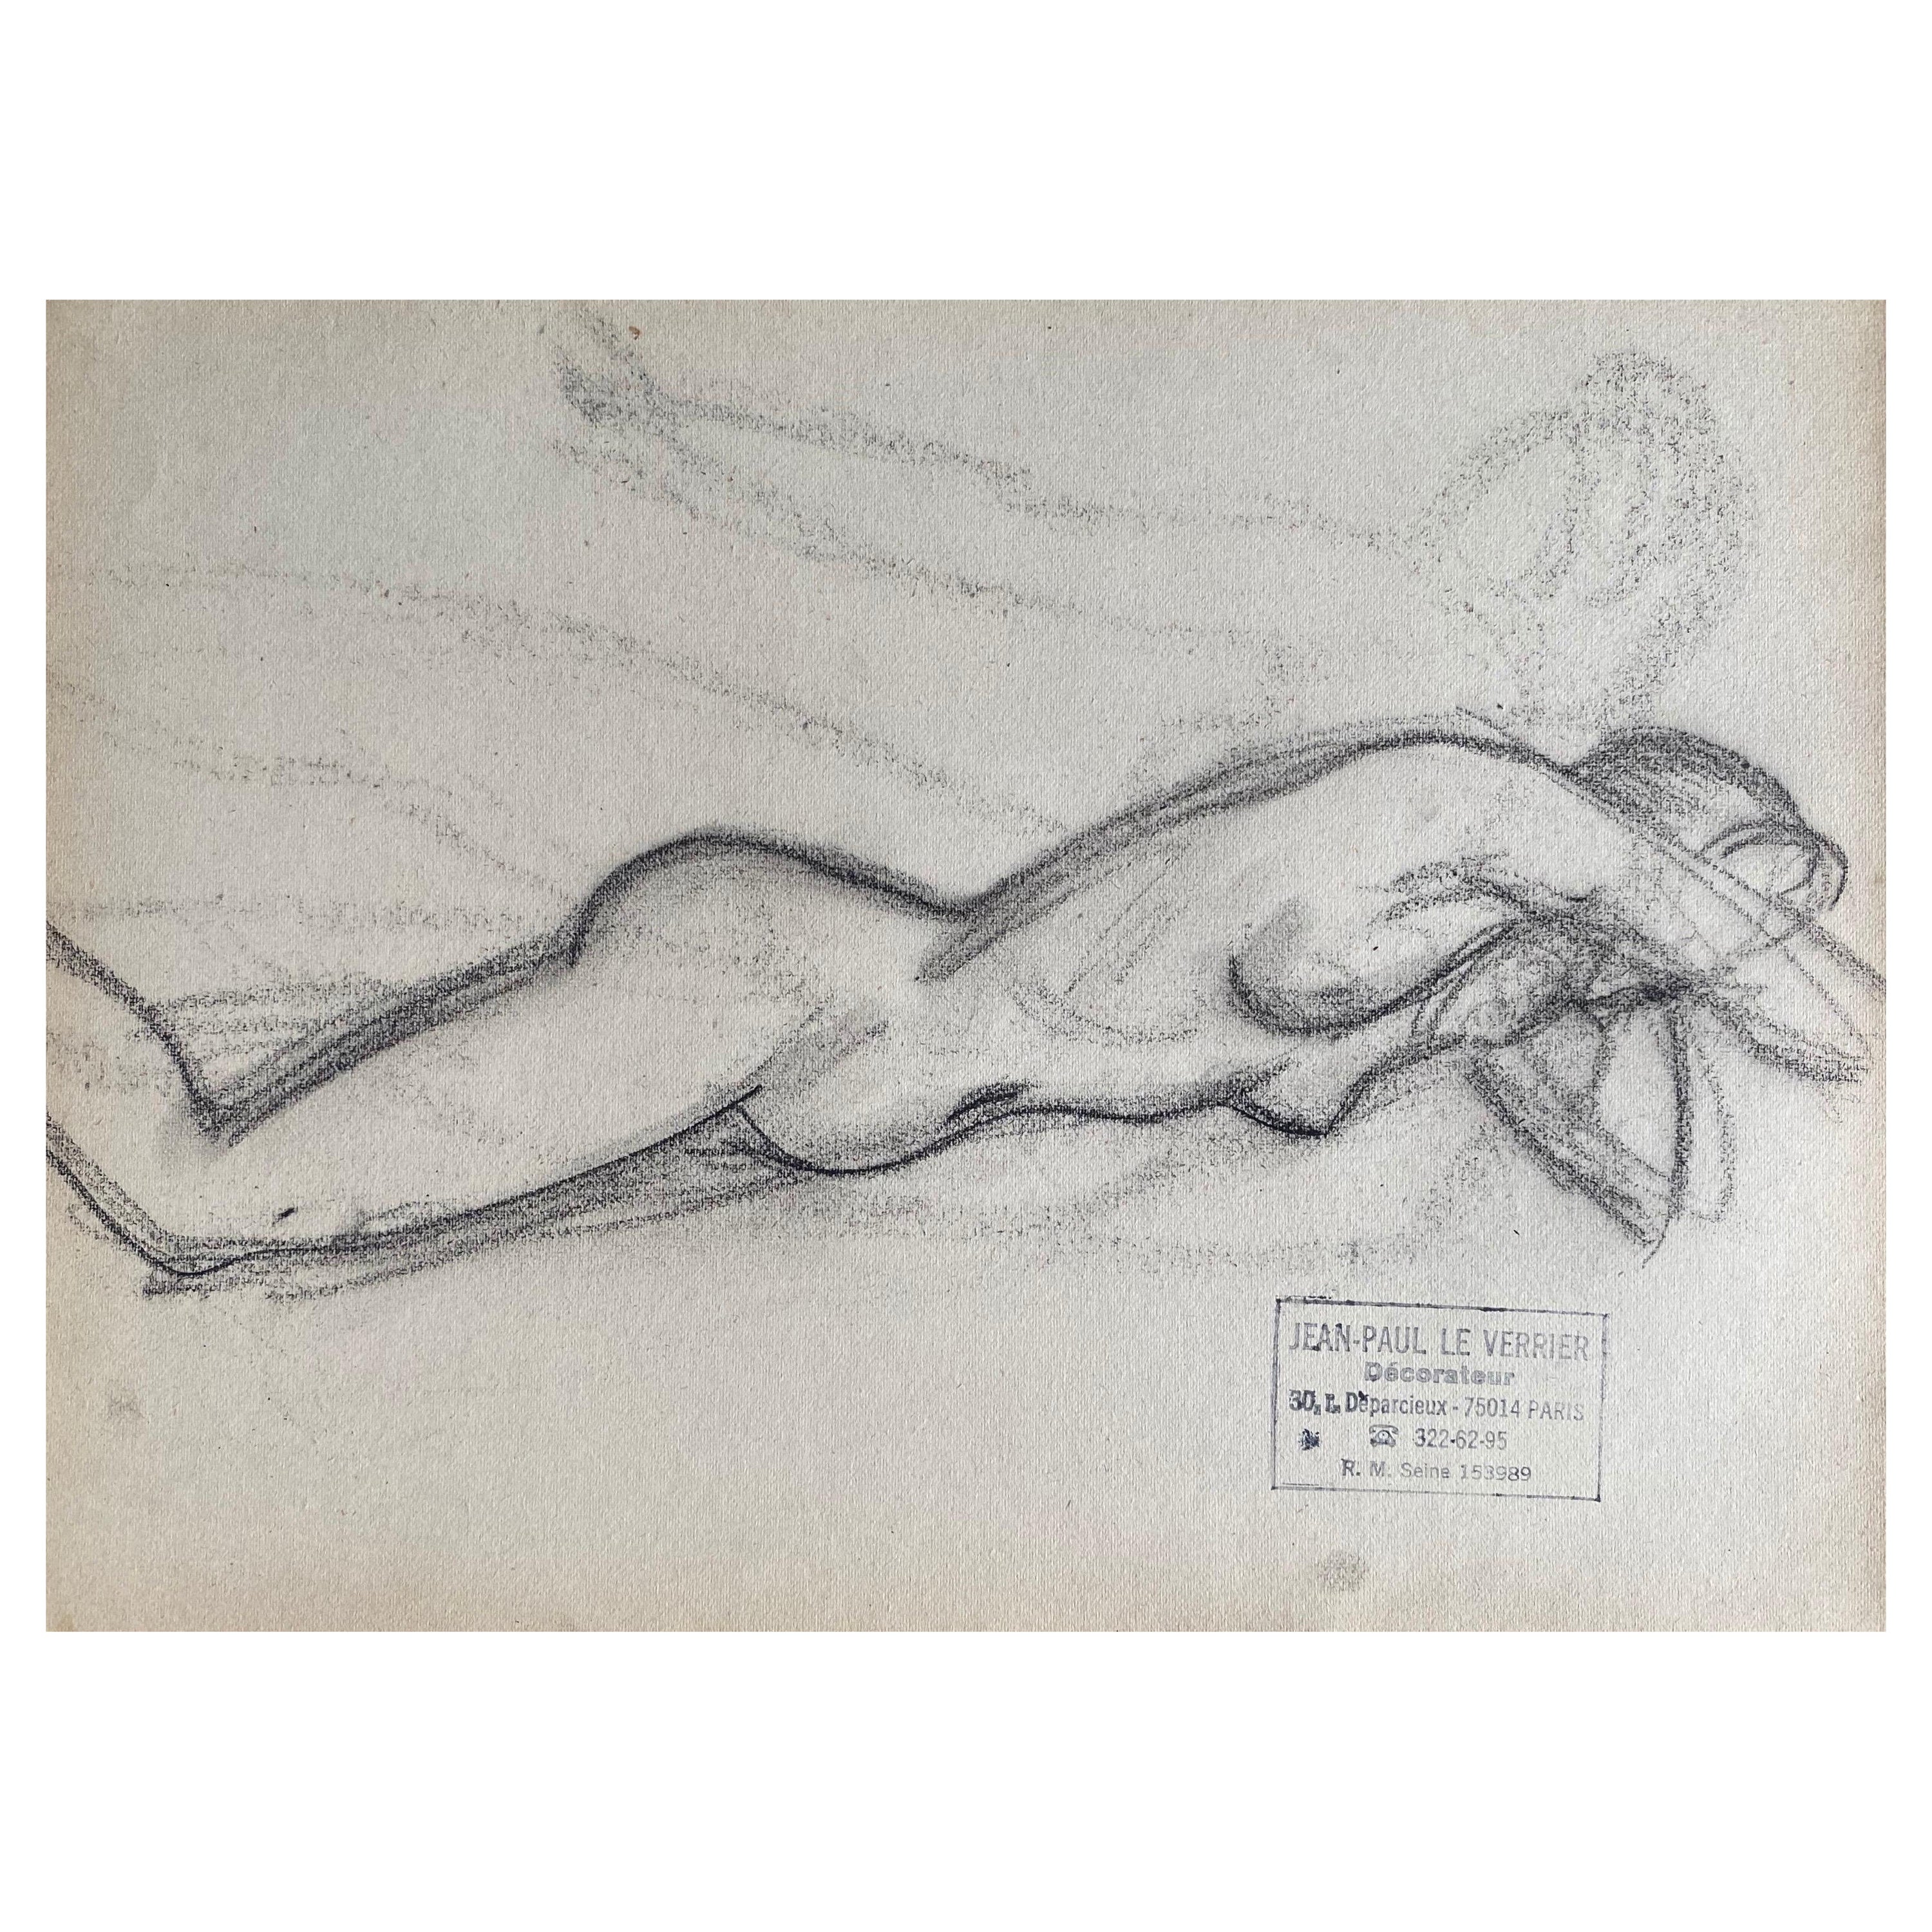 Mid 20th Century, French, Original Line Drawing Sketch Nude Lady, Stamped